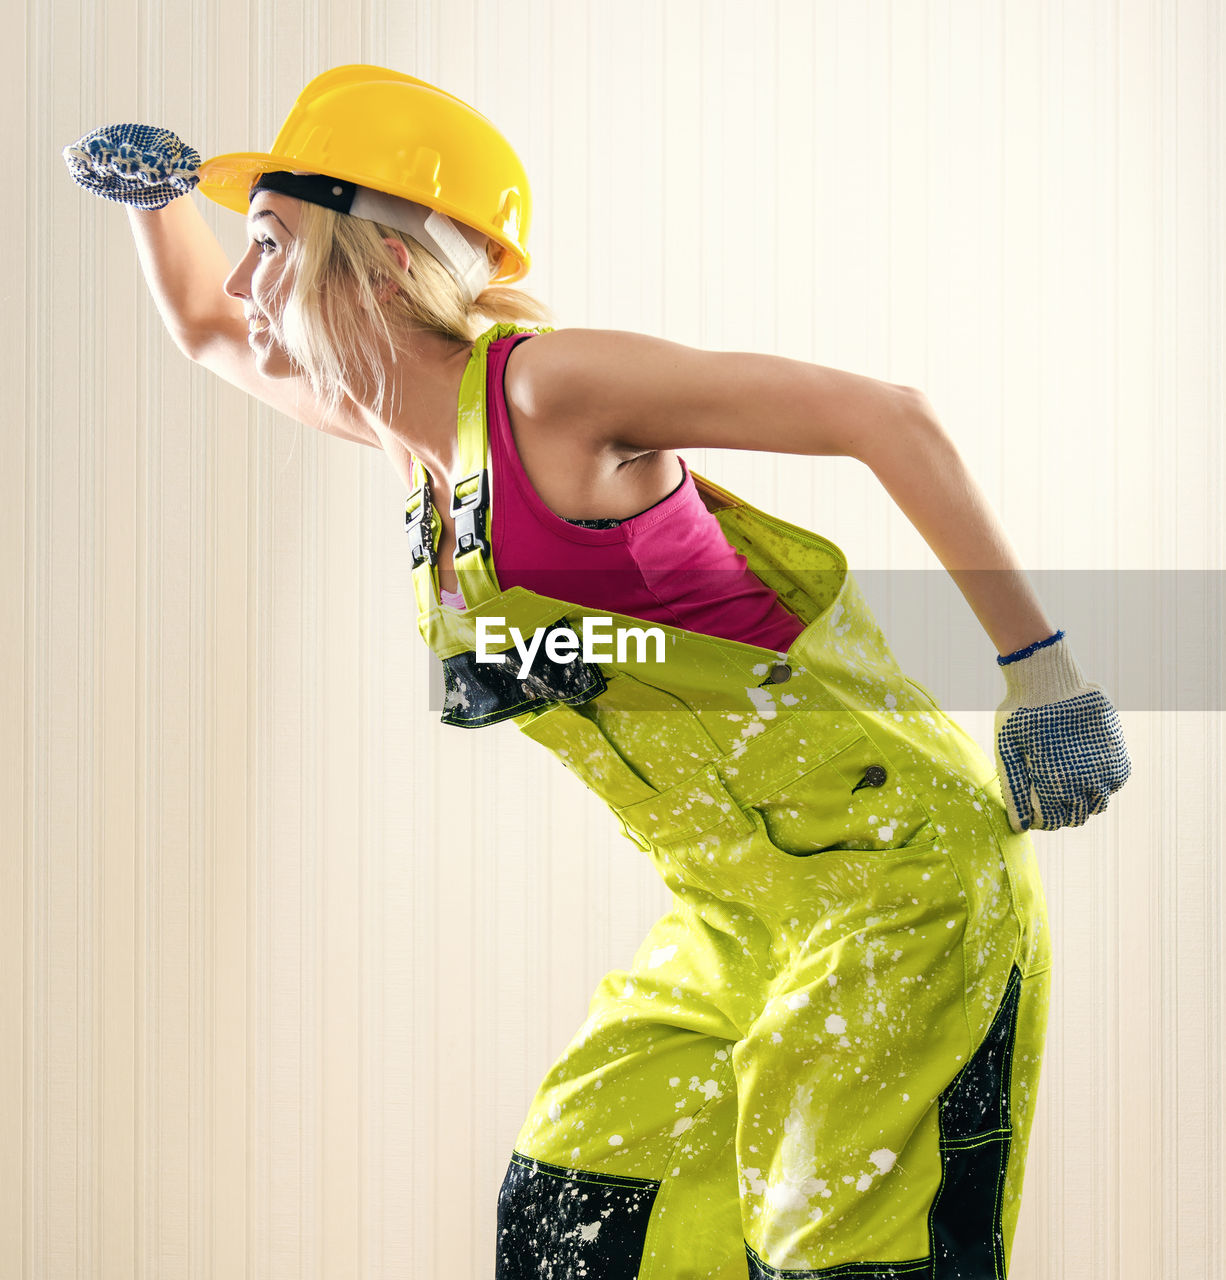 Female worker in coverall looking away while standing against wall